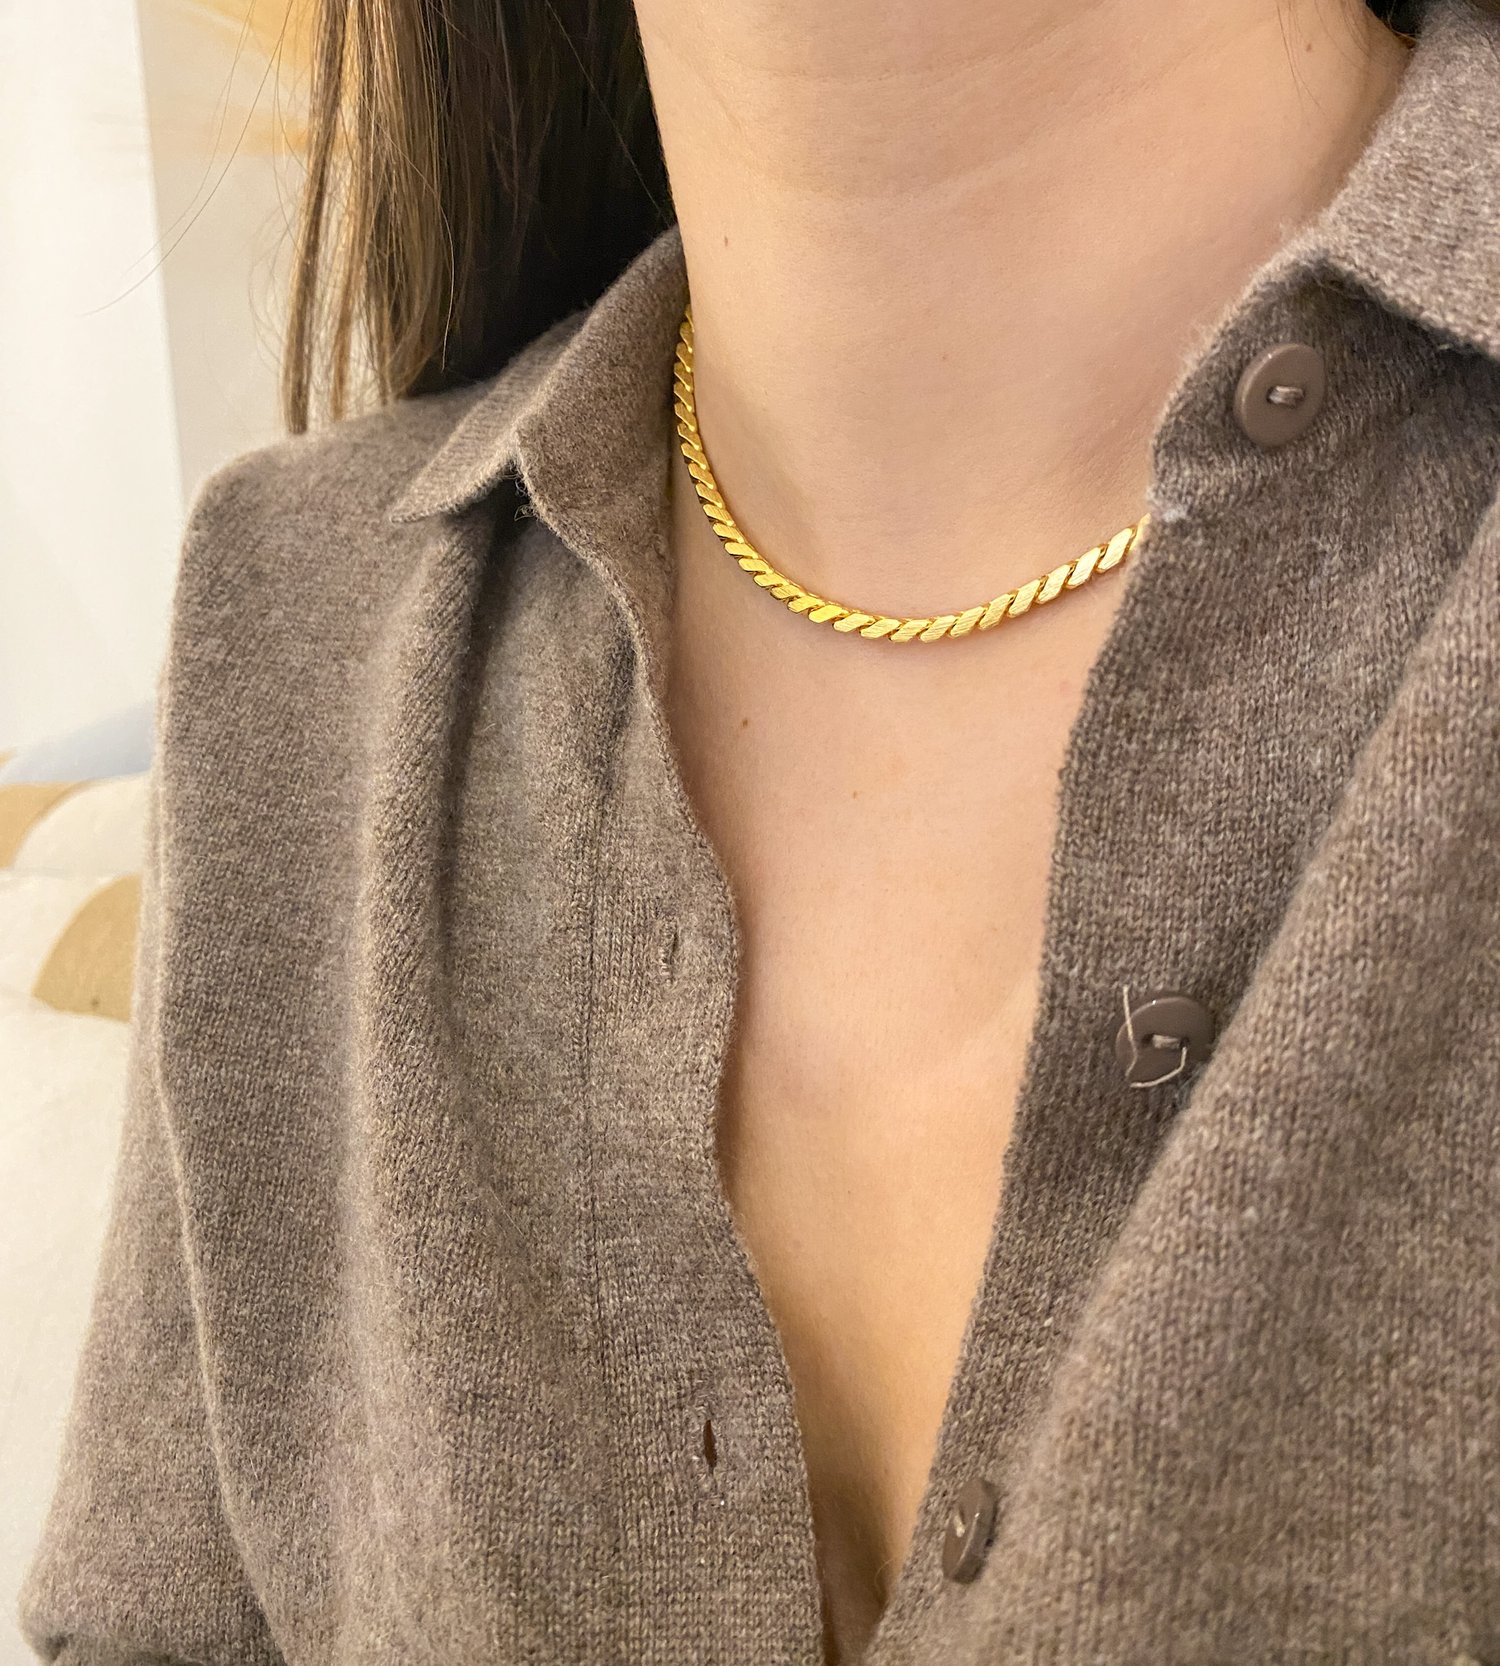 Vintage Gold Color Thin Chain Necklace for Women White Square Pendant  Concise Elegant Necklace 2022 Trend Fashion Jewelry